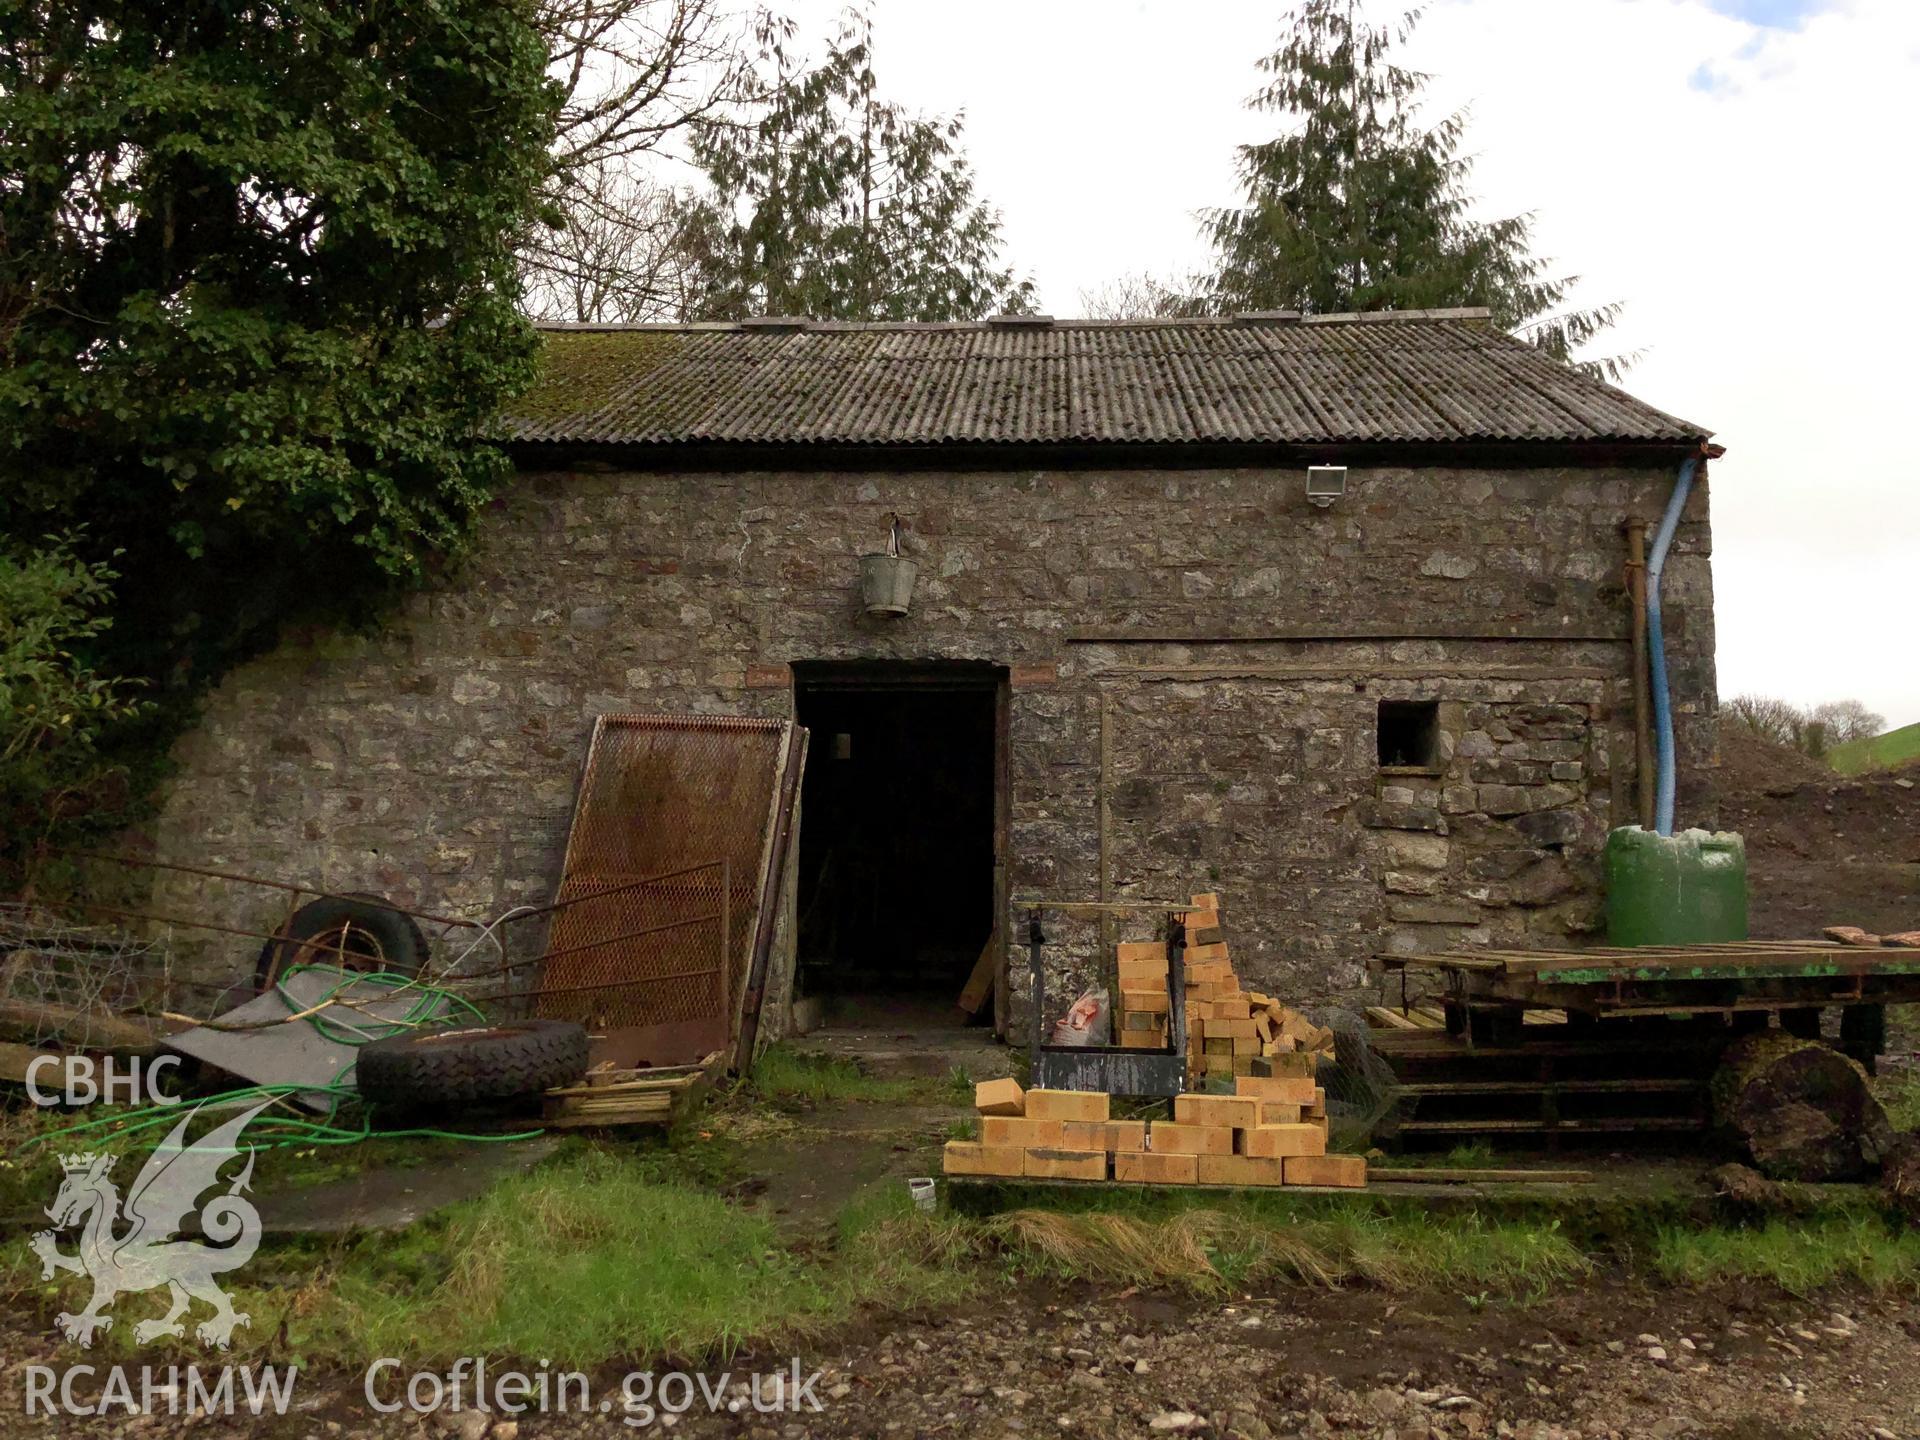 Photograph showing exterior front elevation of 'ale and pail barn,' at Pant-y-Castell, Maesybont, Photographed by Mark Waghorn to meet a condition attached to planning application.